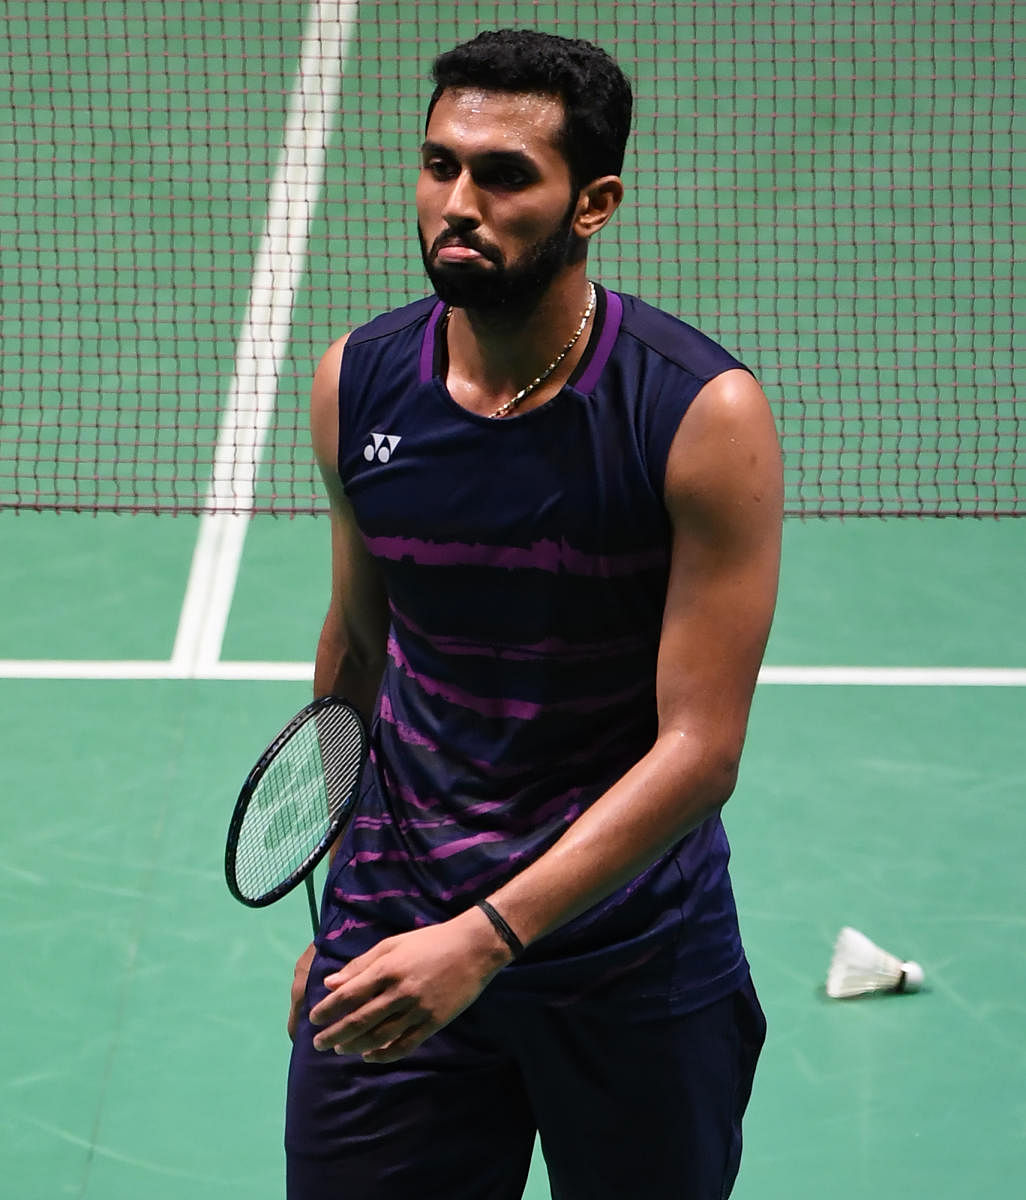 H.S Prannoy of India shows his flastration during the men's singles quarter-final match against Shi Yuqi of China at the Japan Open Badminton Championships in Tokyo on September 22, 2017. / AFP PHOTO / TOSHIFUMI KITAMURA